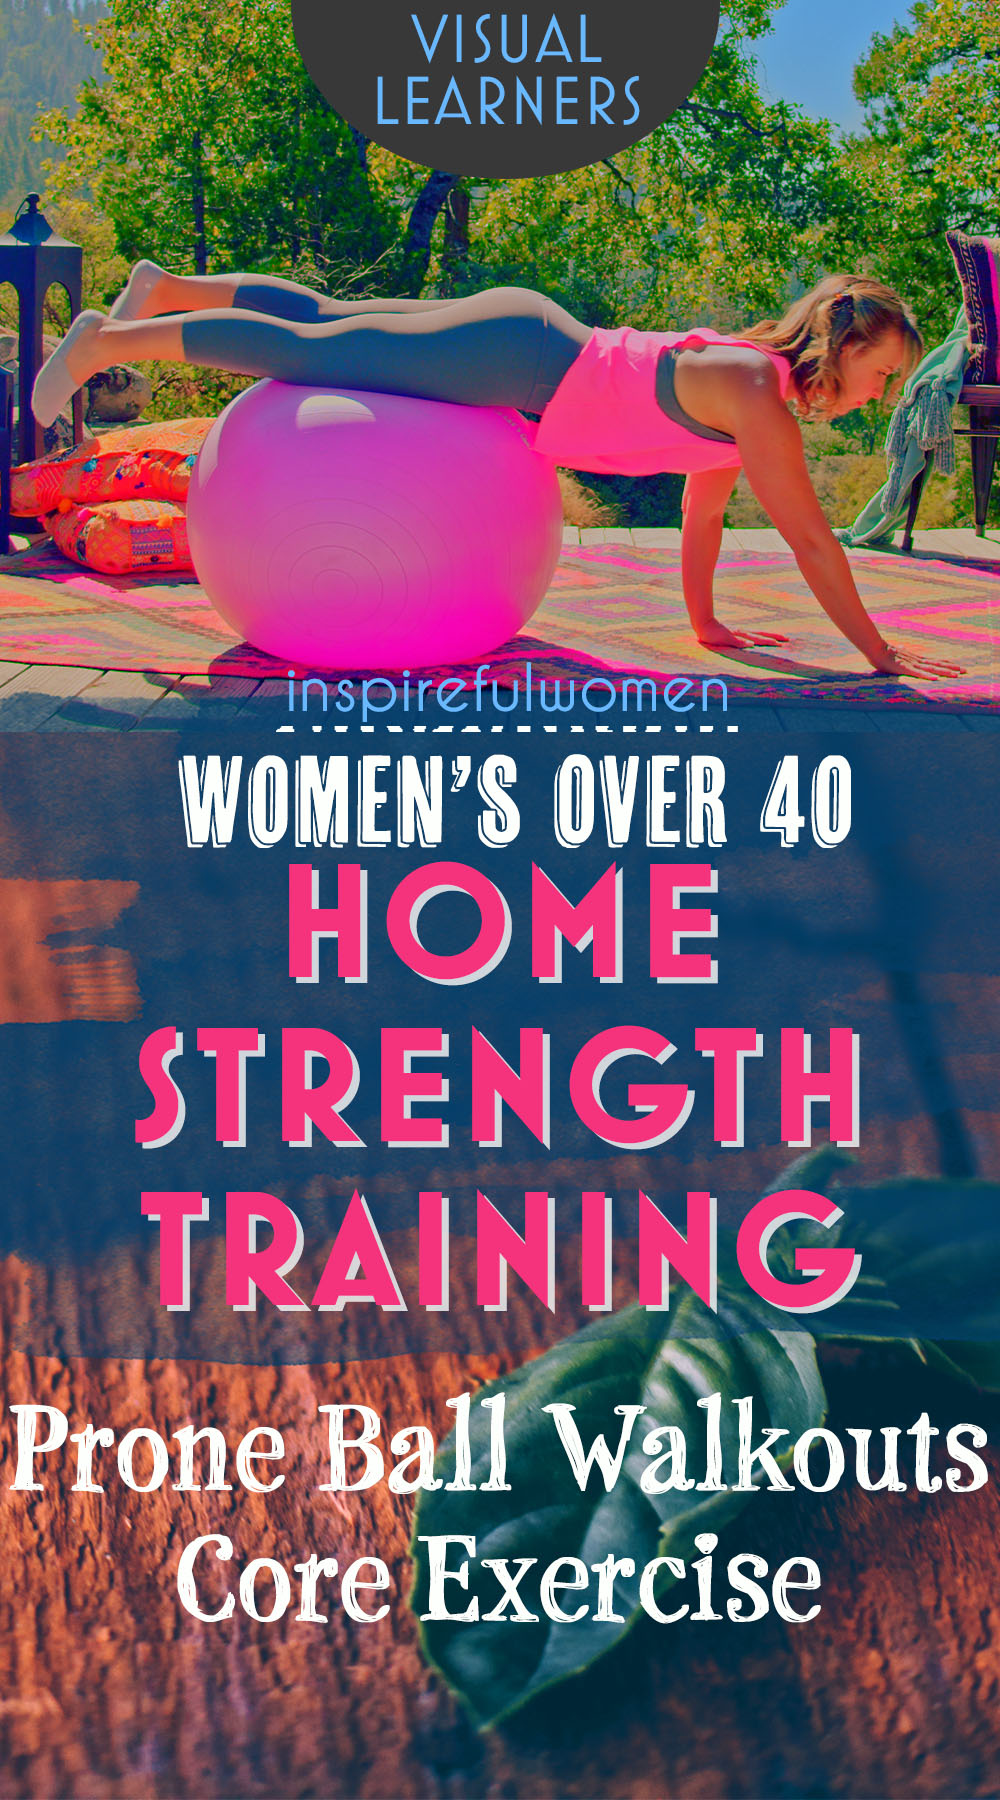 yoga-ball-walkouts-prone-home-stomach-ab-core-toning-exercise-women-over-40